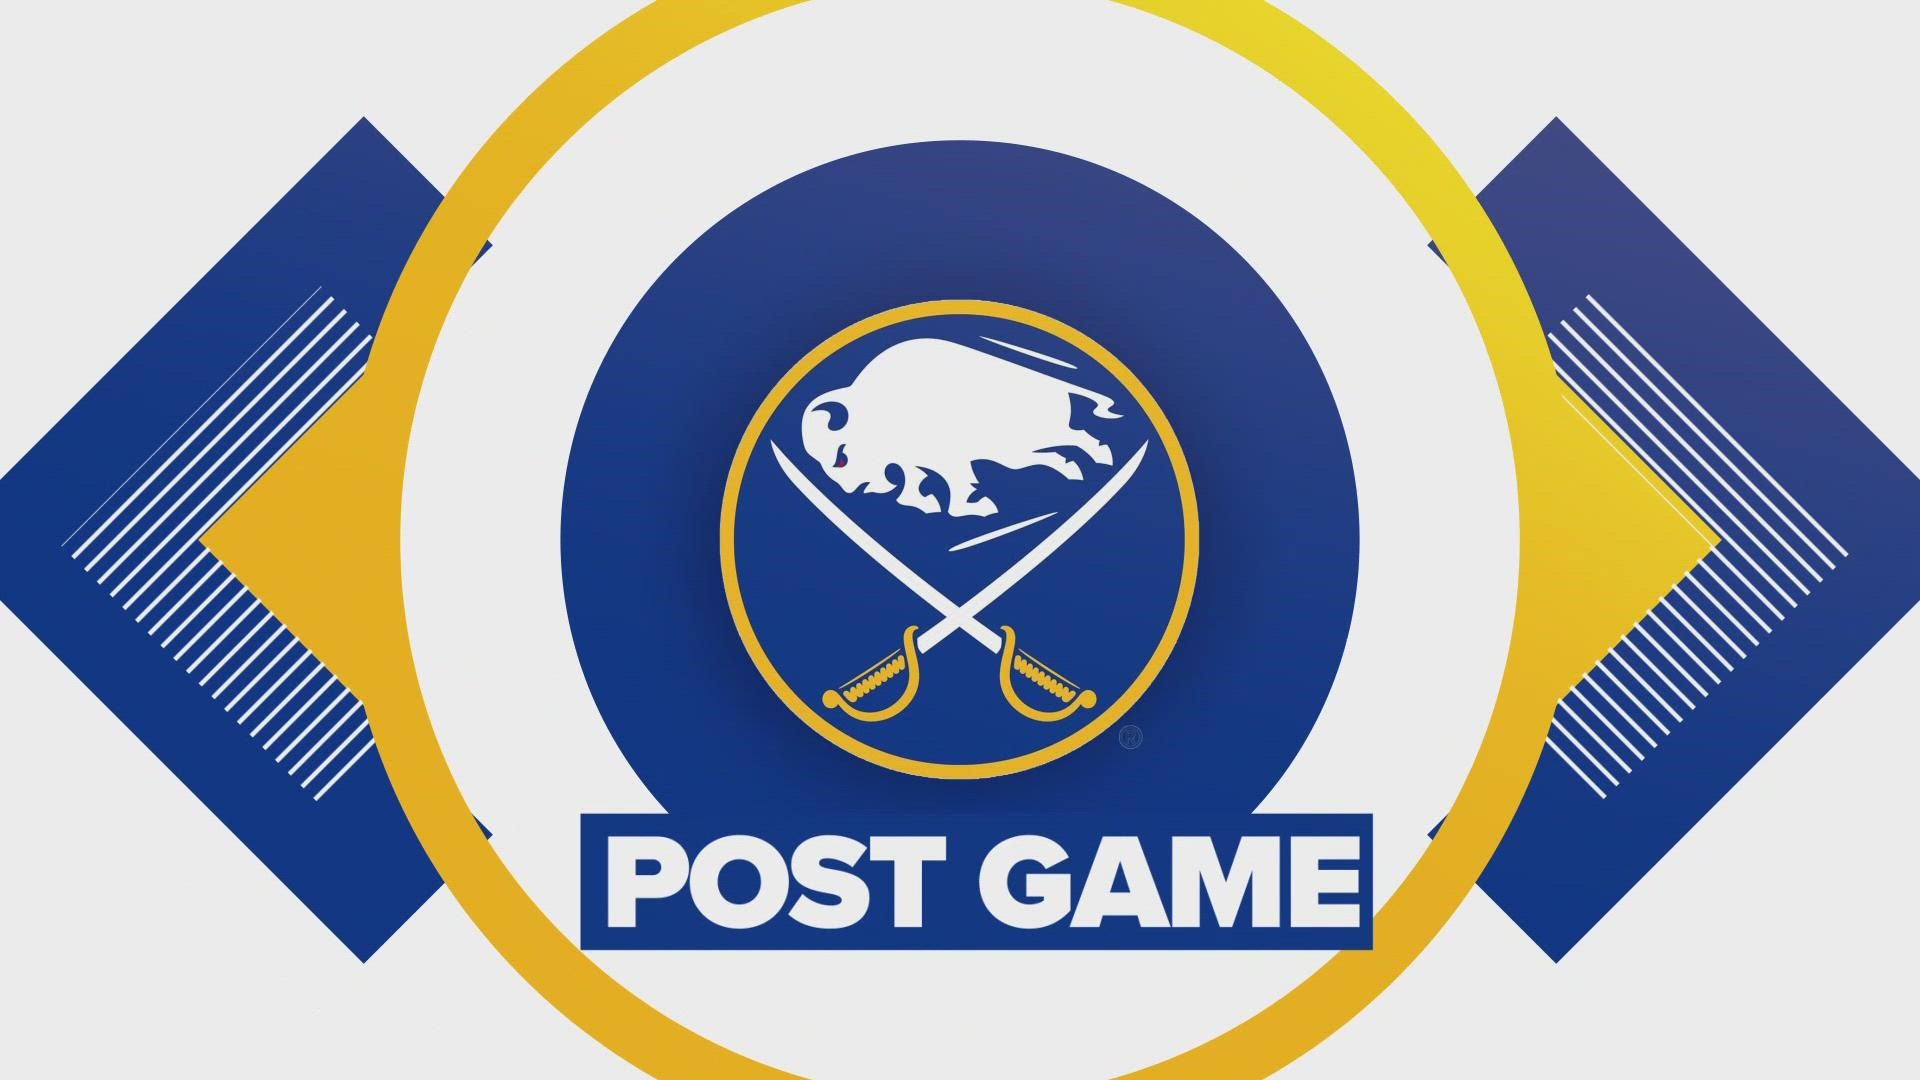 Jeff Carter scored a power-play goal 1:36 into overtime and the Pittsburgh Penguins took advantage of a match penalty to Buffalo’s Jeff Skinner to beat the Sabres.